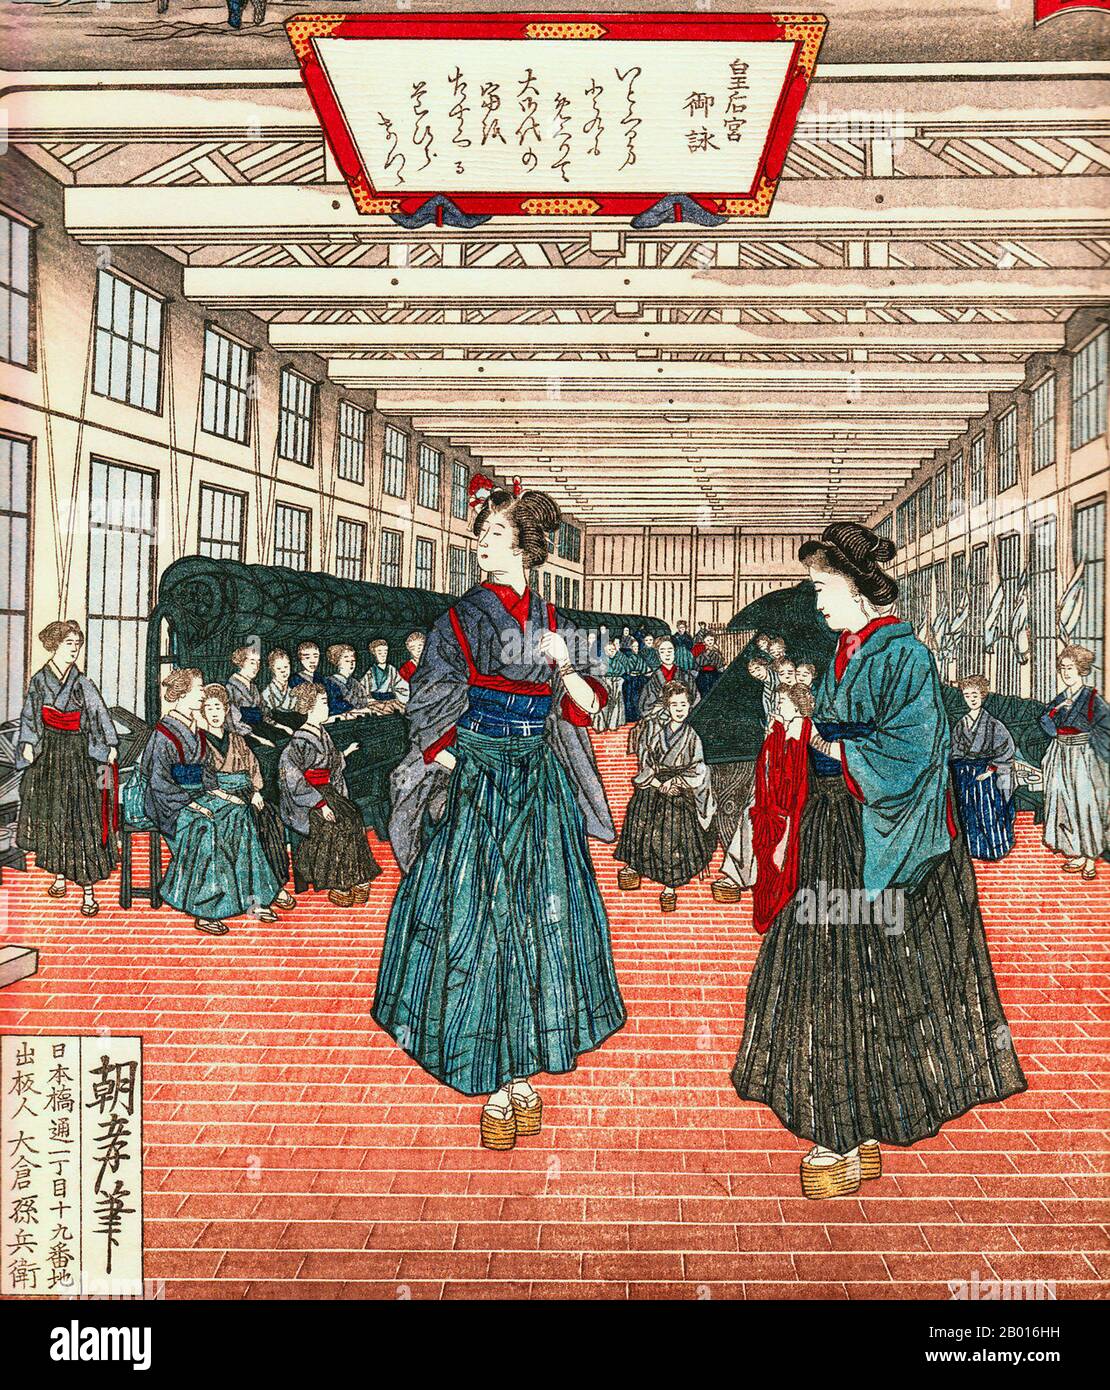 Japan: 'Study of Engineers'. Ukiyo-e woodblock print by Asataka, c. 1890.  Two fashionably dressed women inspect a yarn of silk in a silk mill.  Silk was a major manufacturing industry in Meiji Japan. At the time of this 1890 print, the process was still semi-automated, with silk reeling by hand the norm. Stock Photo